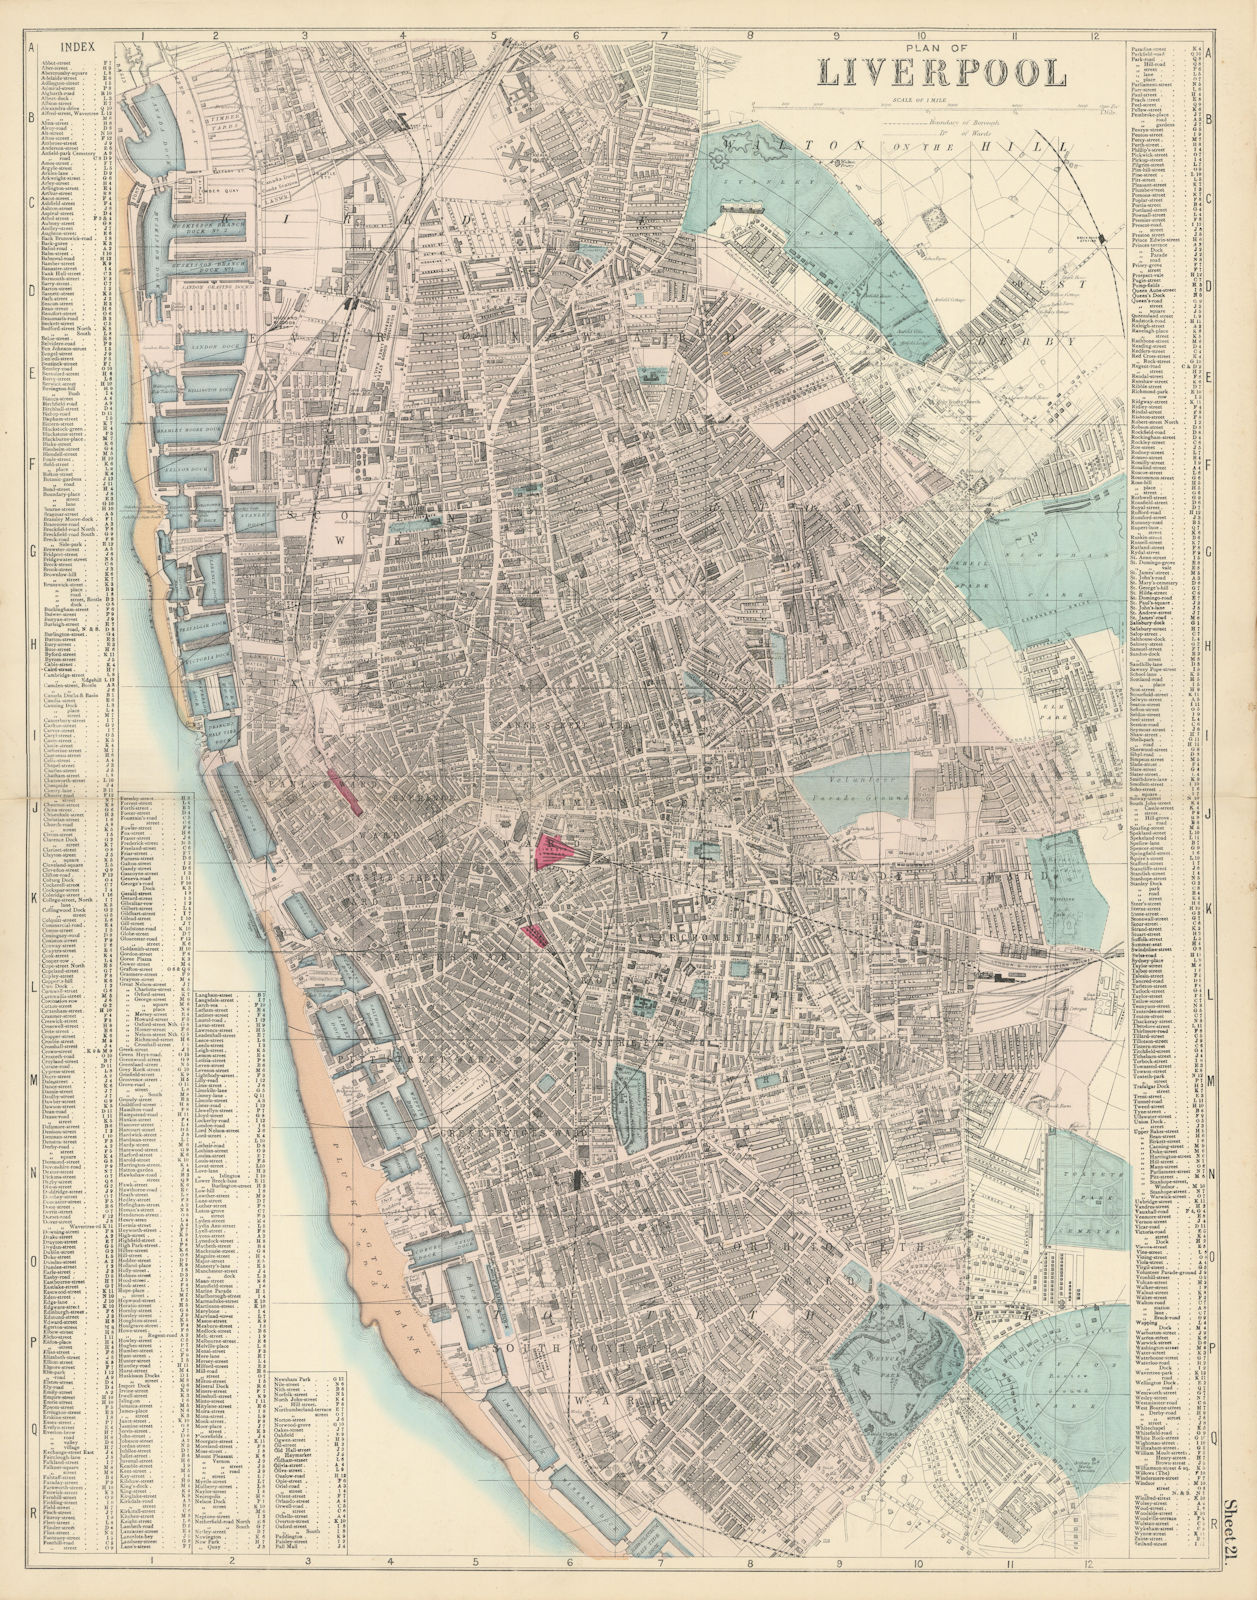 LIVERPOOL Everton Waterfront Vauxhall Toxteth town city plan BACON 1883 map